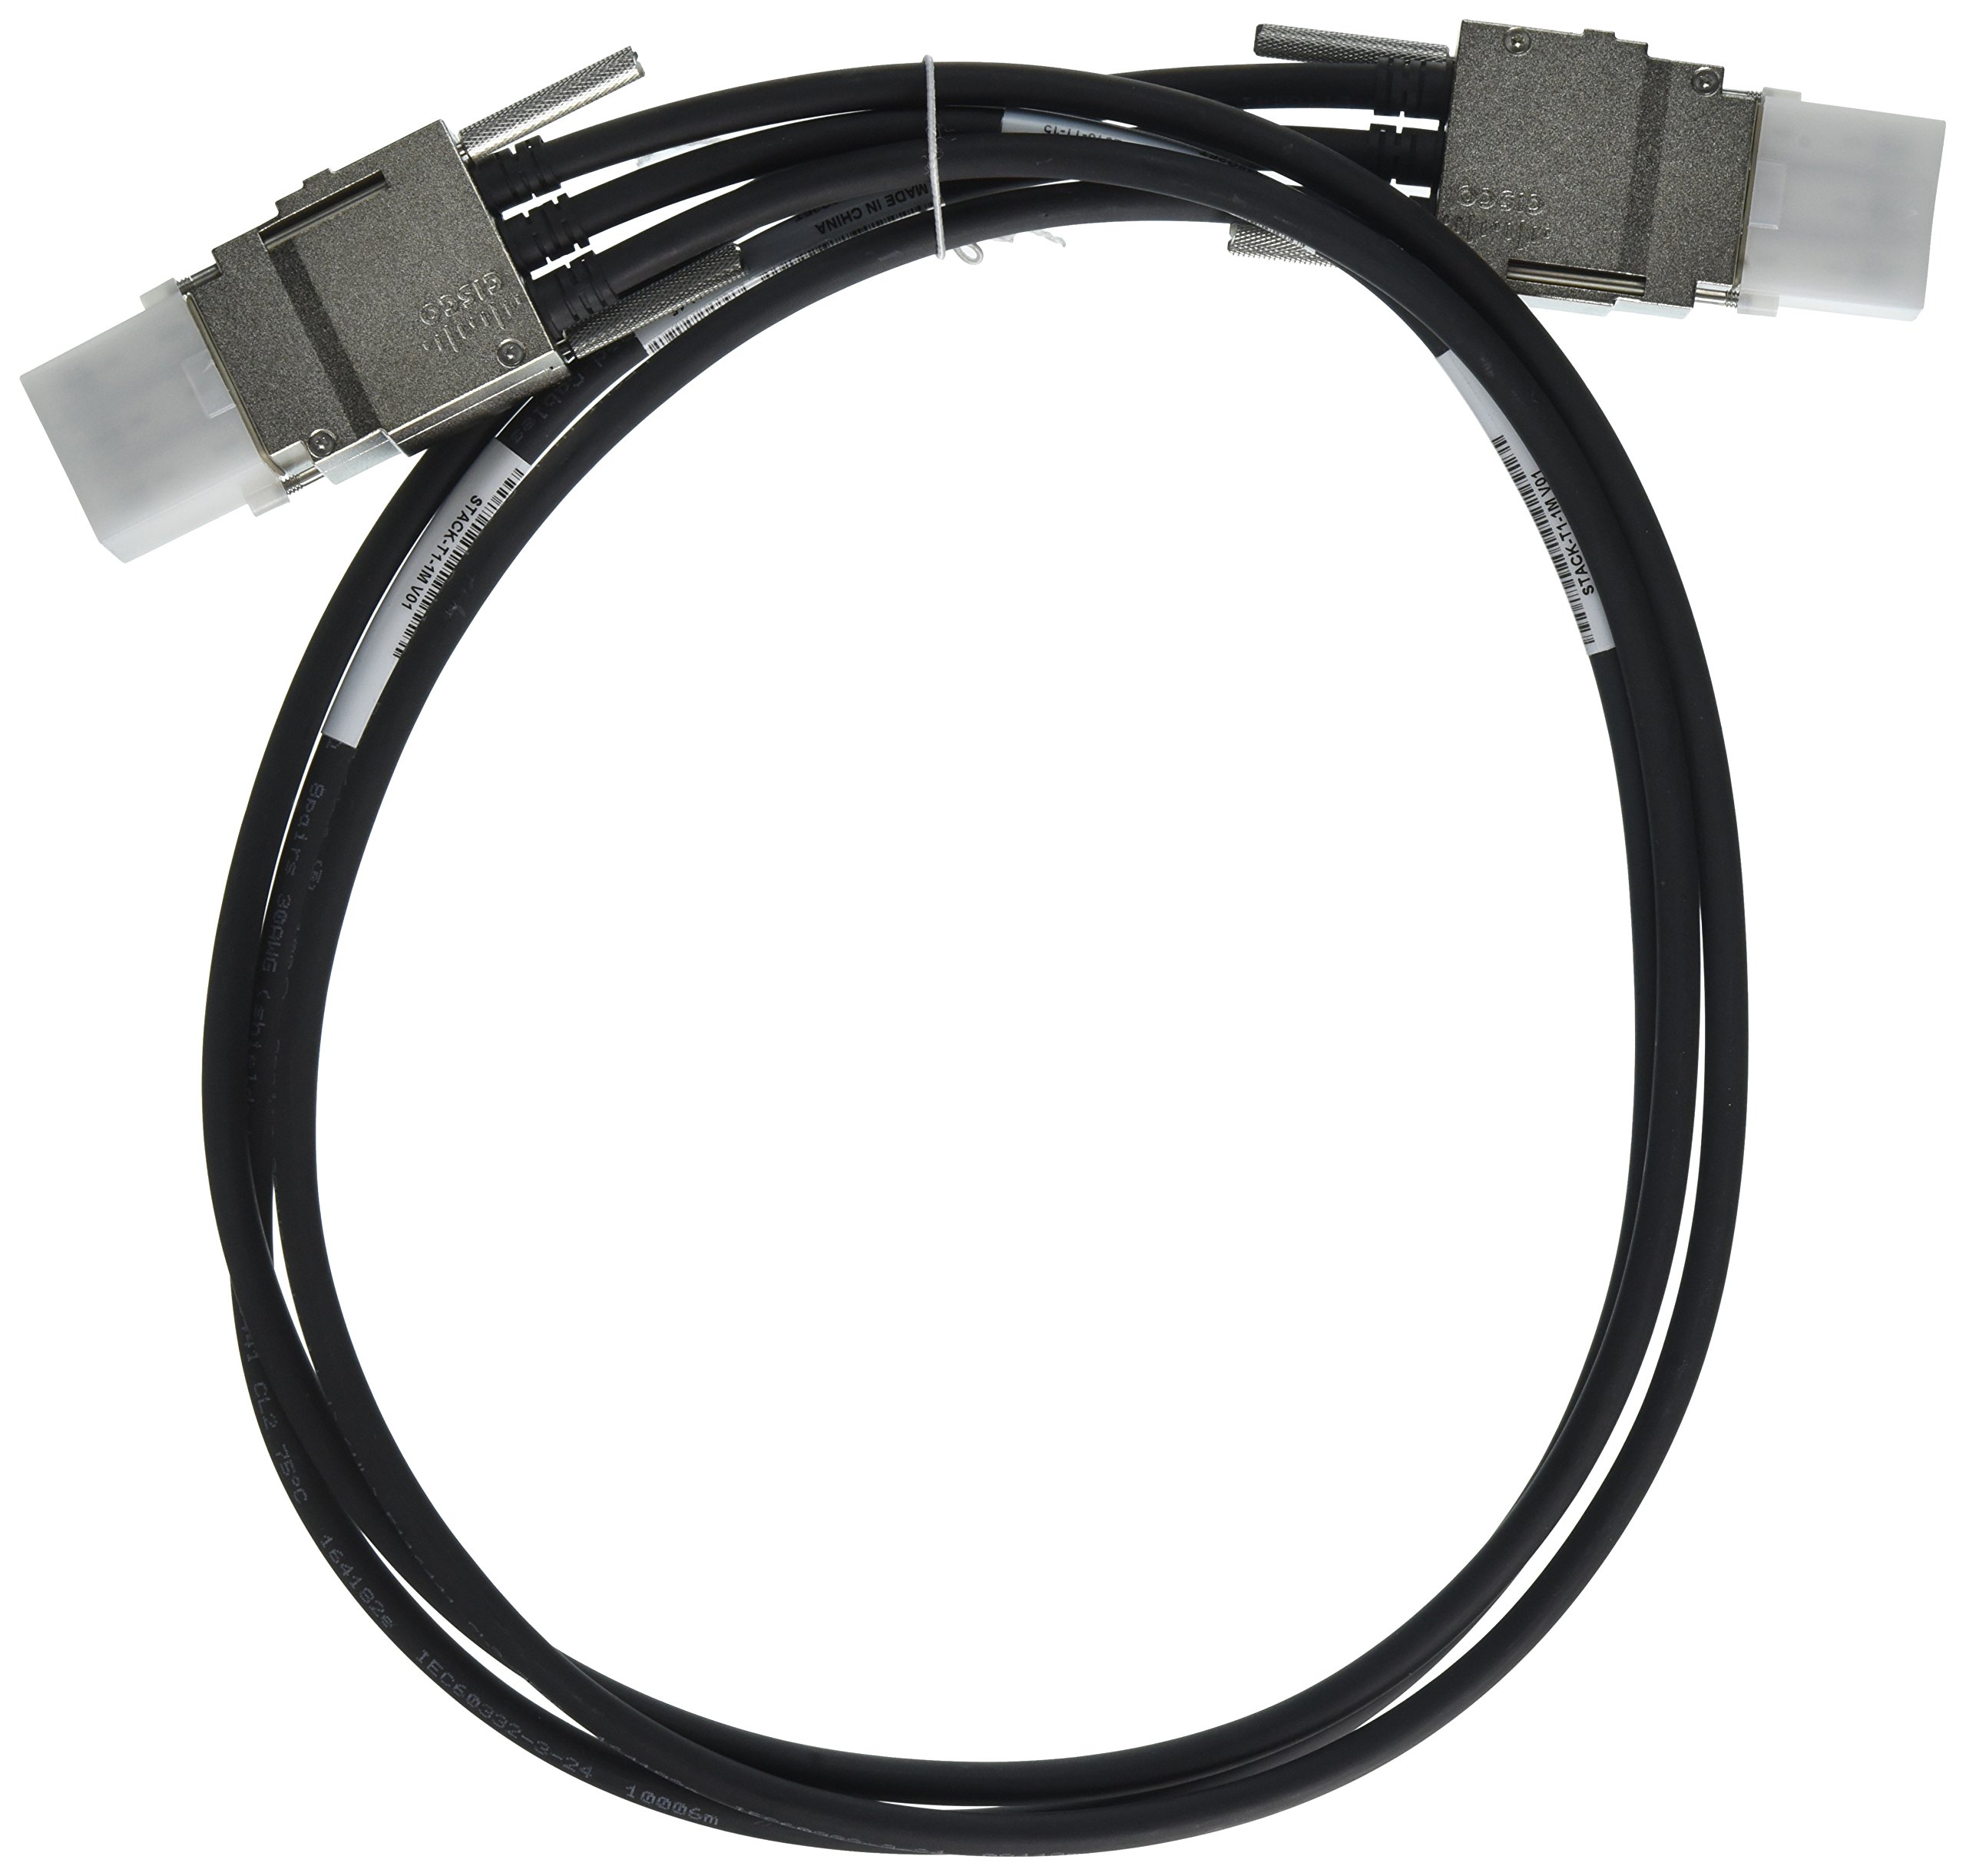 1m Type 1 Stacking Cable Cisco Accessories Stack T1 1m 882658521973